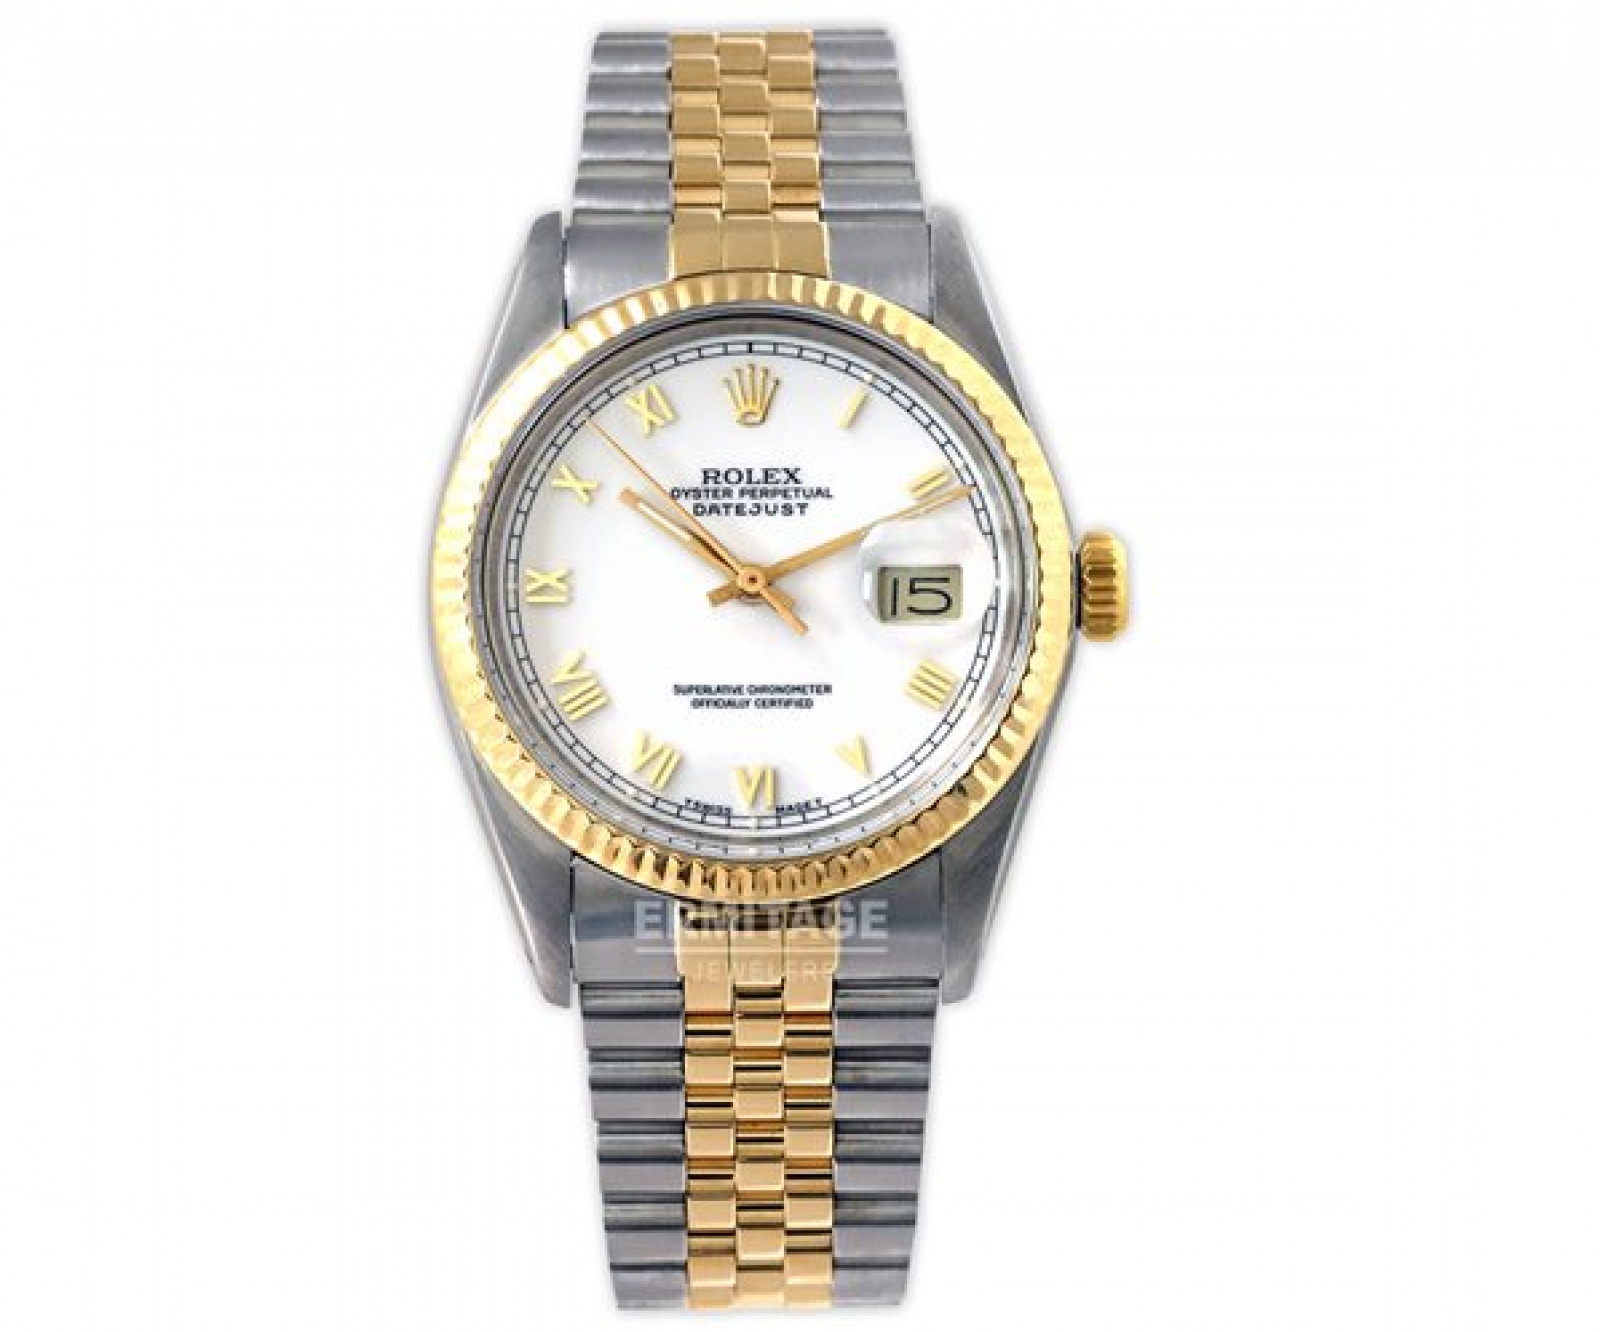 Rolex Datejust 16013 with 18 kt Yellow Gold